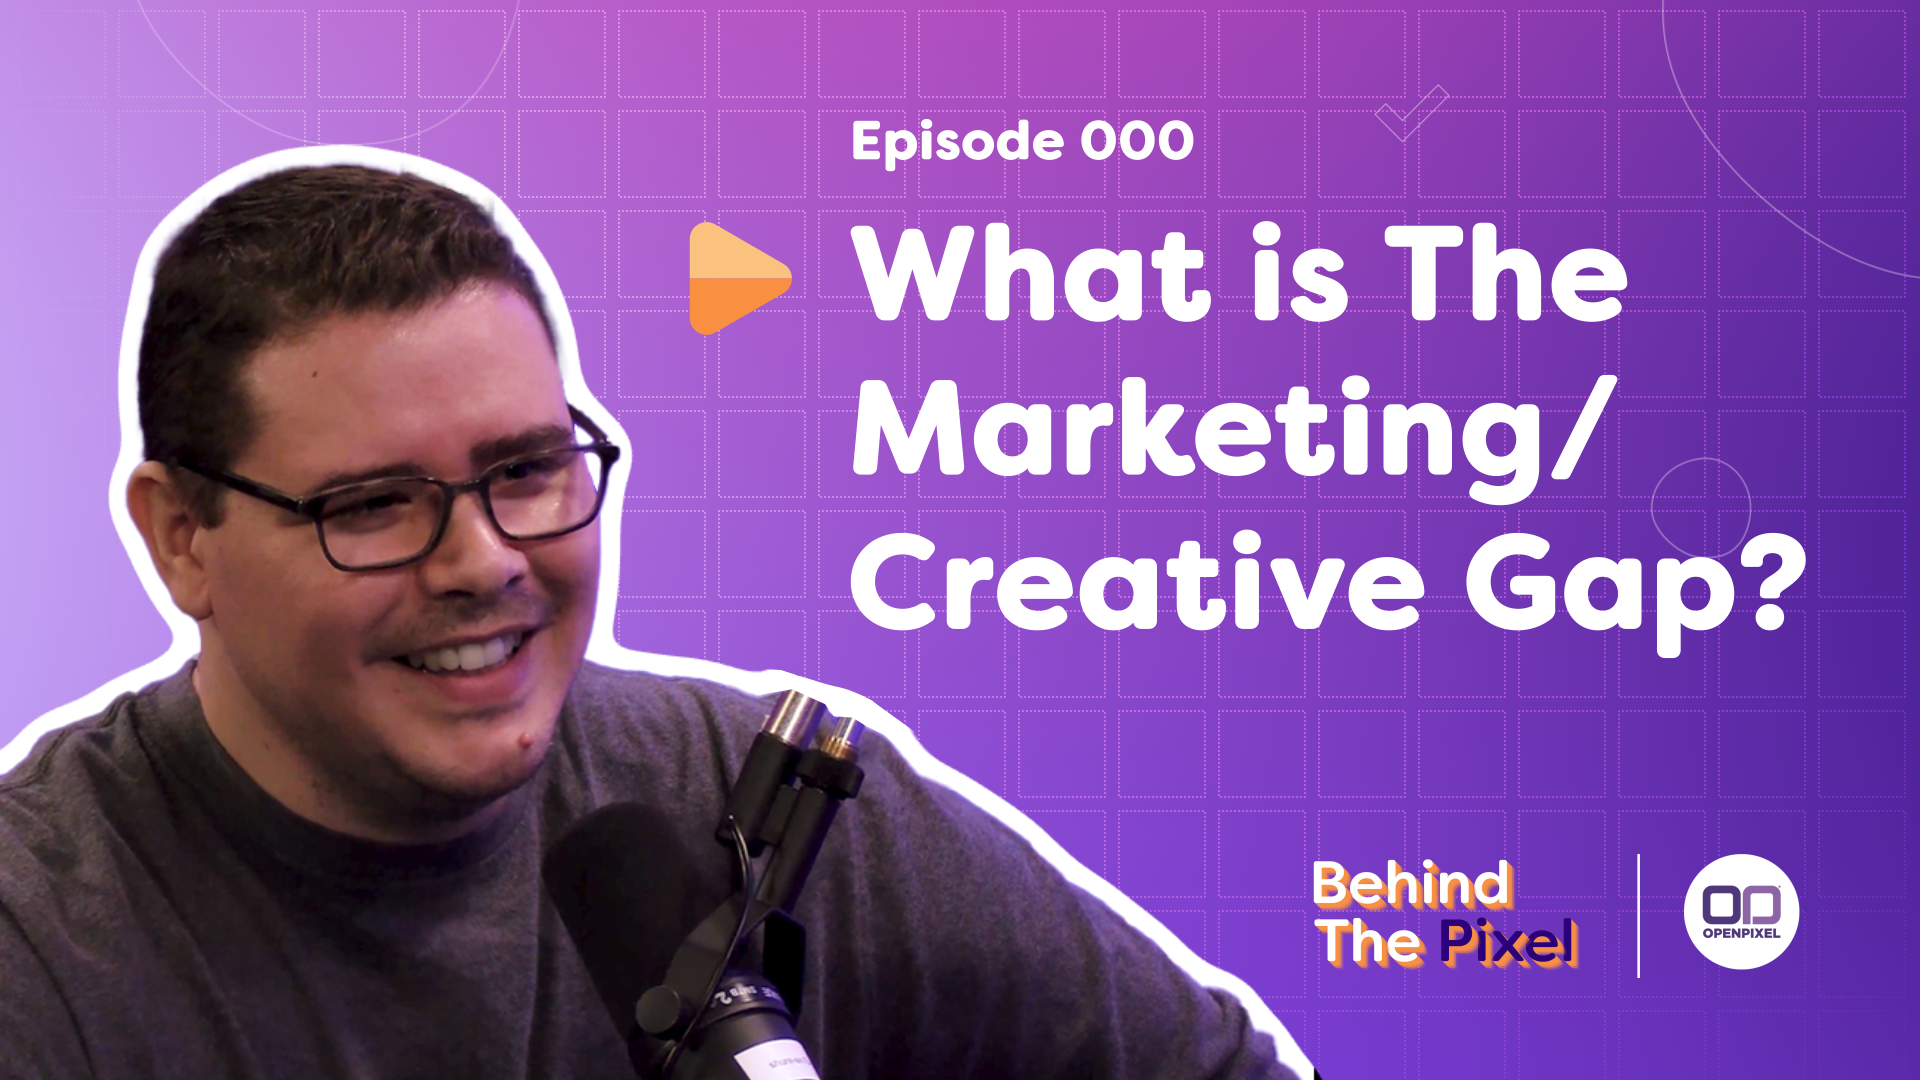  Imgage description: Will Colón is smiling with a white outline surrounding him like a sticker. The title reads: Episode 000: What is the Marketing/Creative Gap? 